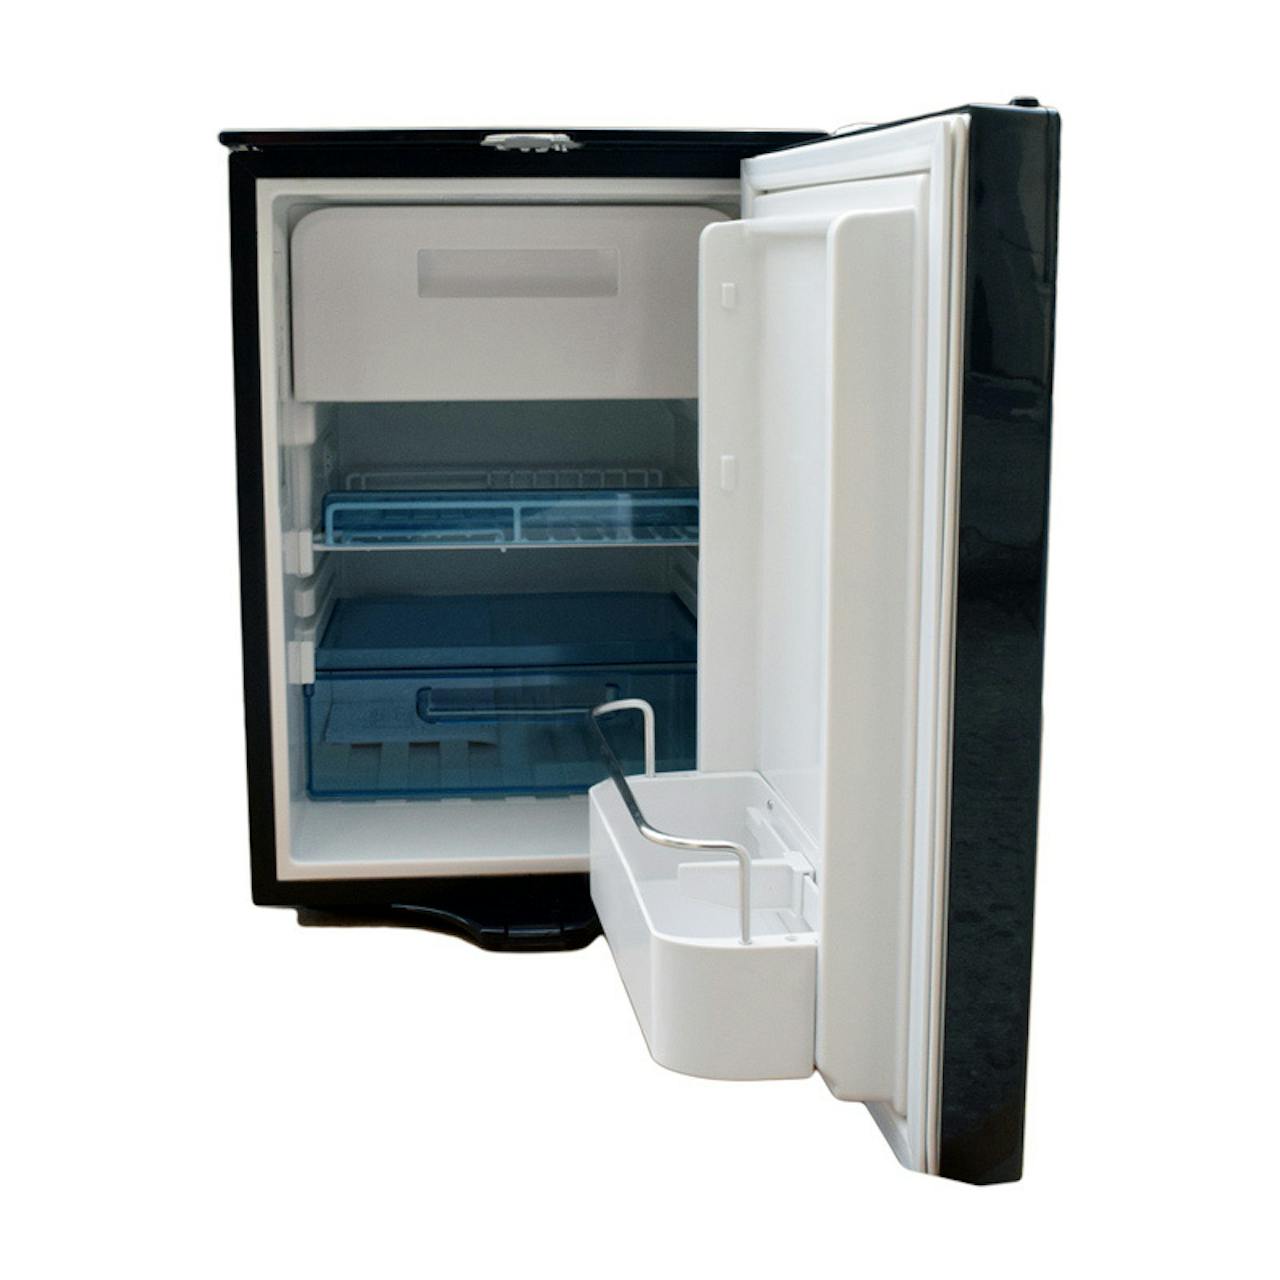 A Dometic Fridge: Large Or Small, It Can Cool It All